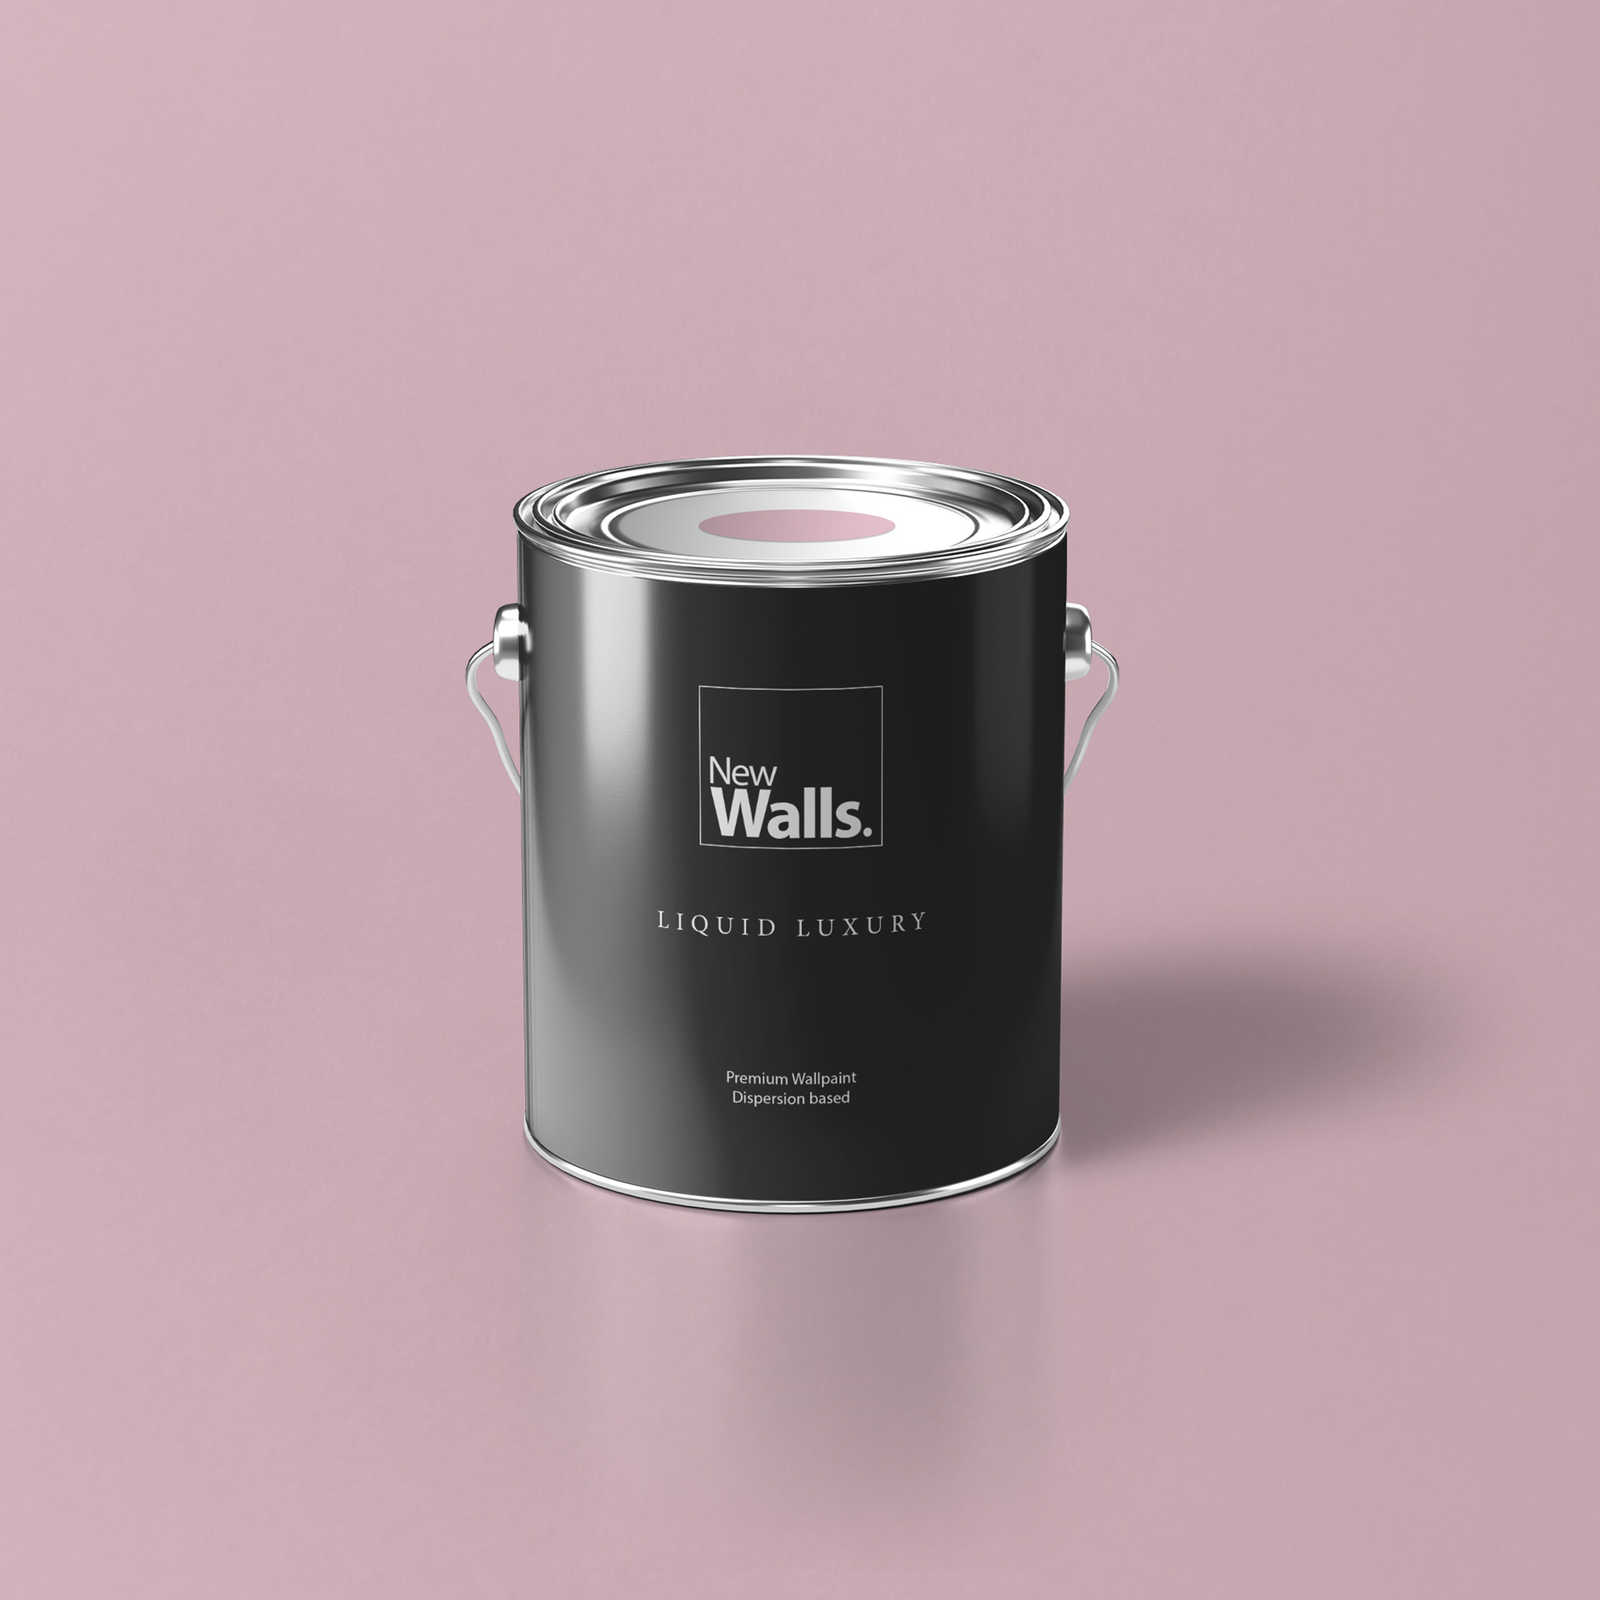 Premium Wall Paint serene pink »Beautiful Berry« NW209 – 2.5 litre
